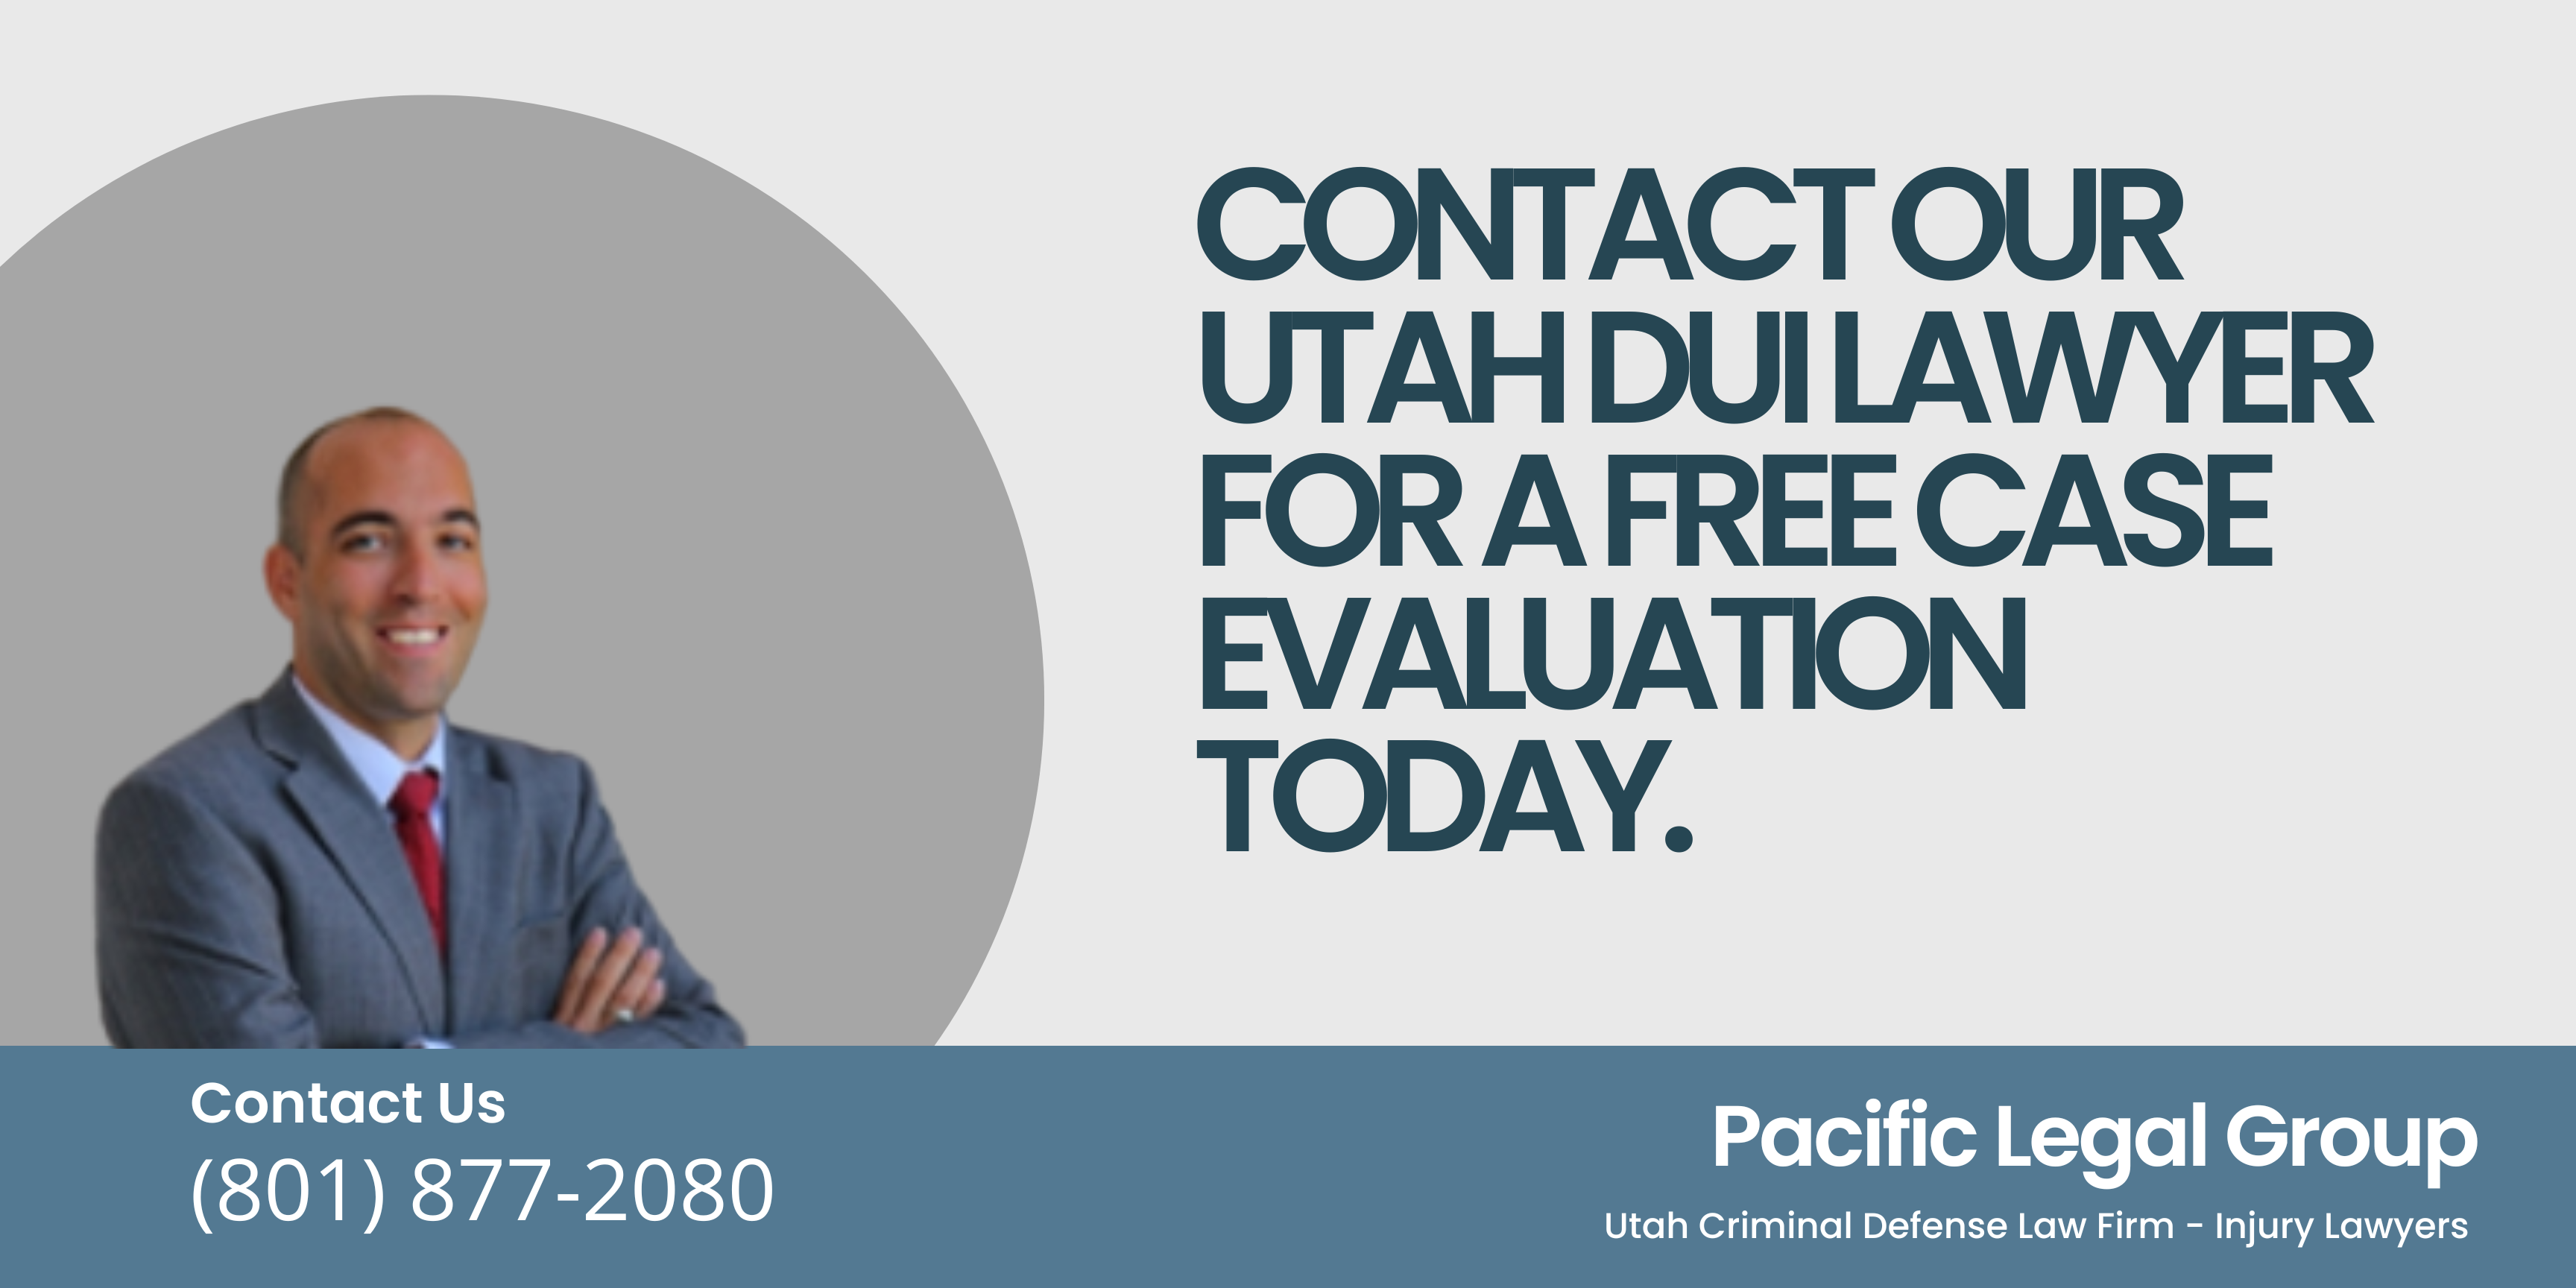 Contact our Utah DUI Lawyer